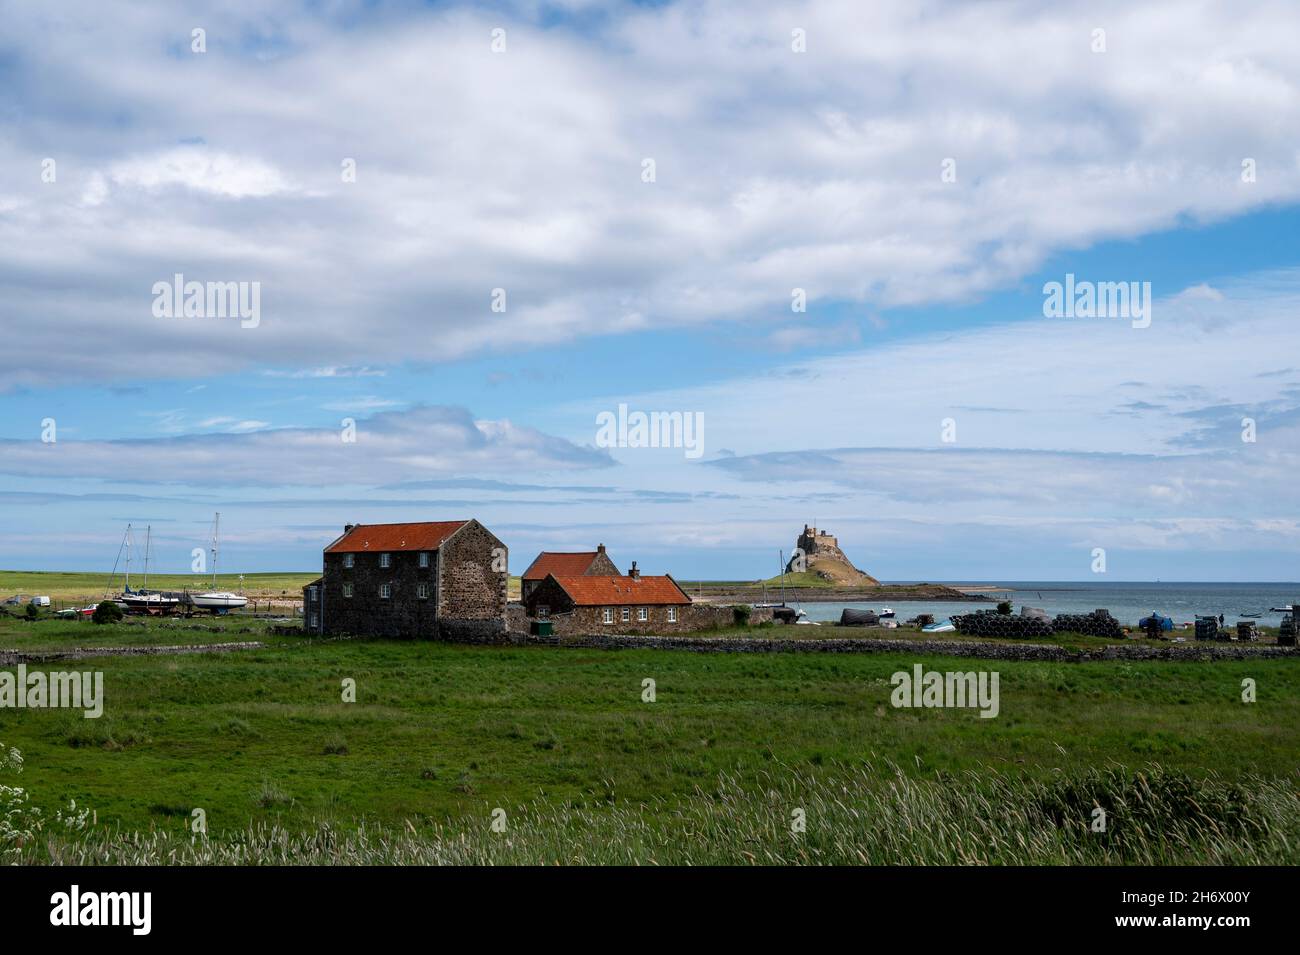 Lindisfarne Harbour, Holy Island, with attractive harbourside buildings, fishing huts and the ancient castle in the background. Stock Photo